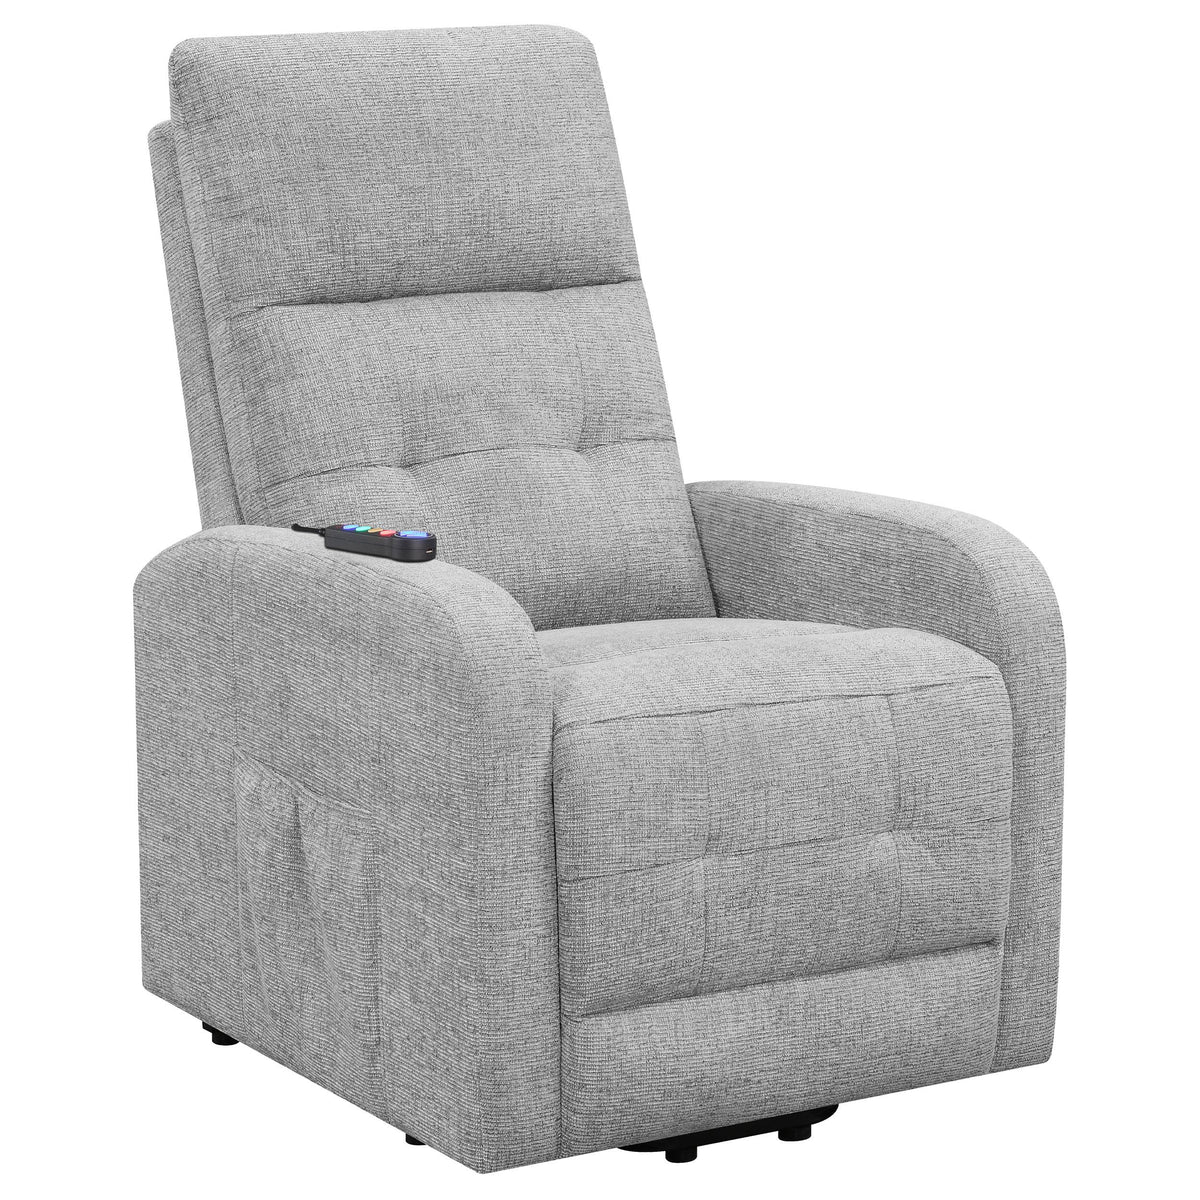 Howie Tufted Upholstered Power Lift Recliner Grey  Half Price Furniture